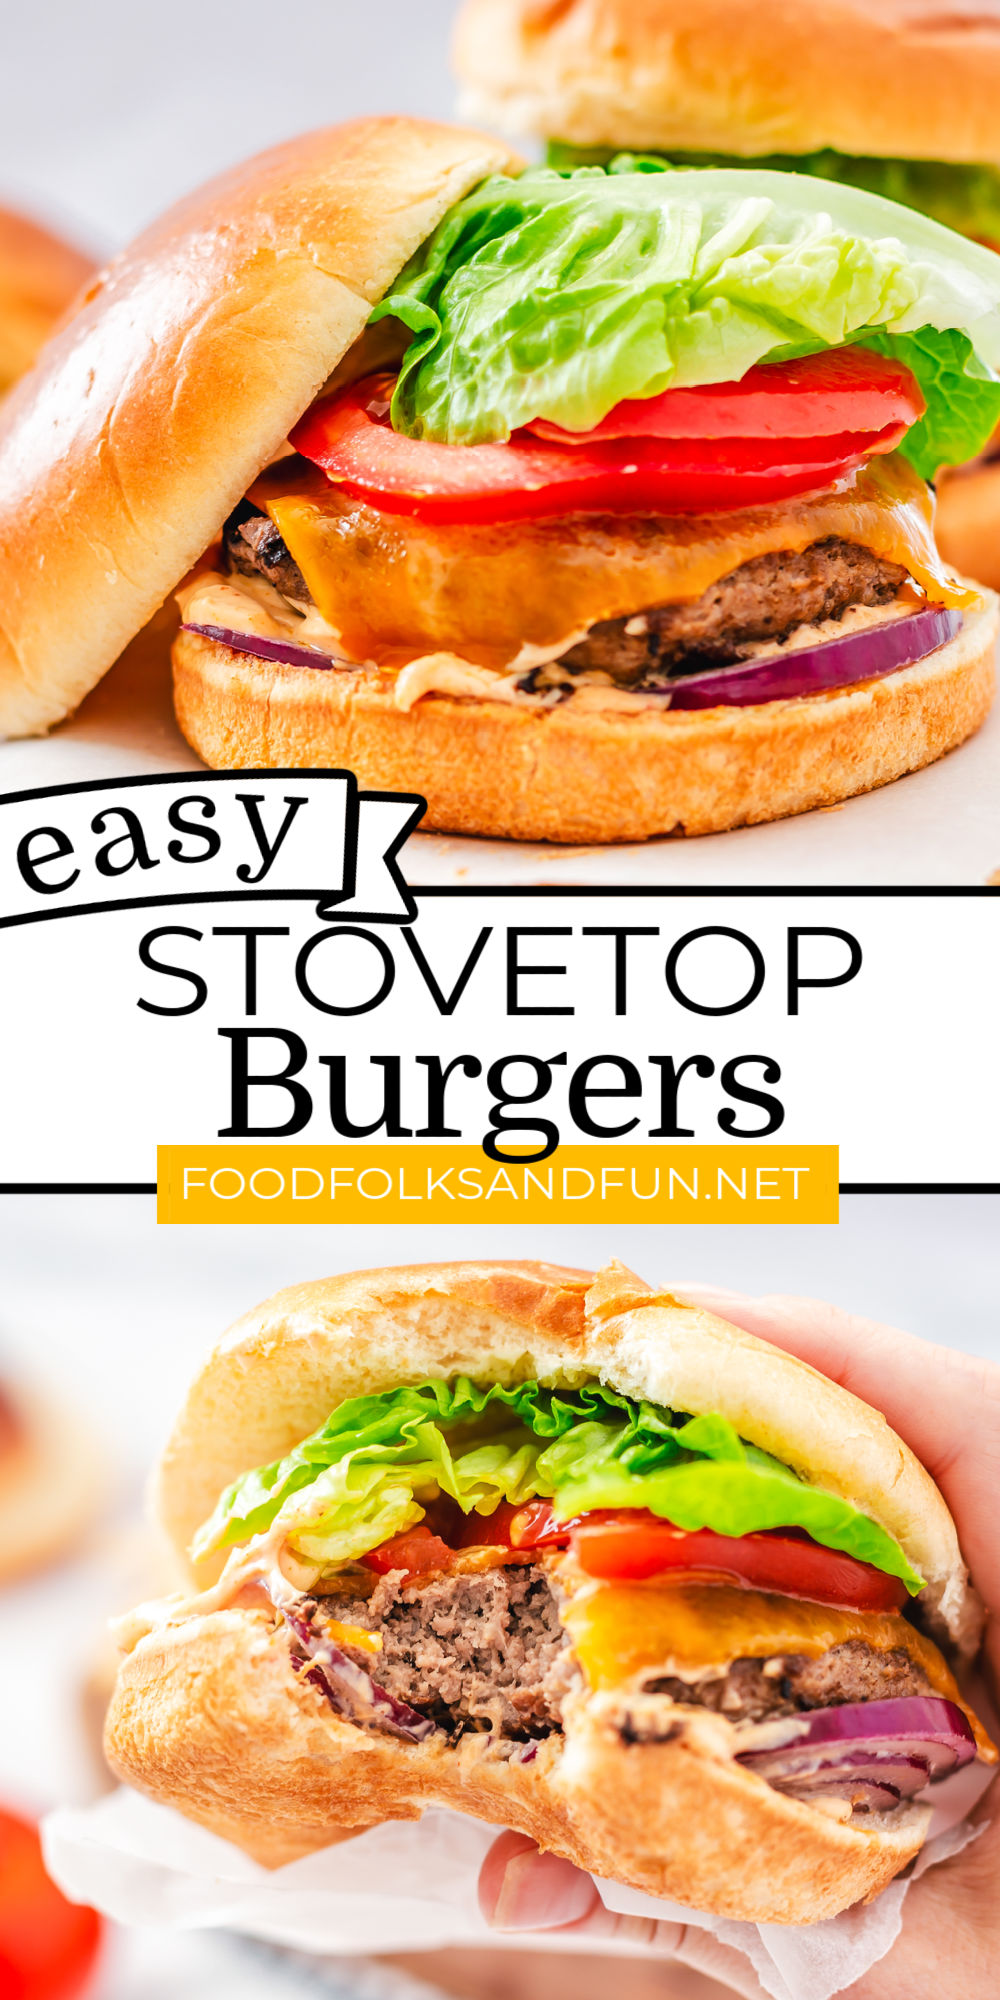 Stovetop Burgers are tasty and easy to make. Come learn how to cook burgers on the stove so you can enjoy juicy cheeseburgers any time of the year! via @foodfolksandfun